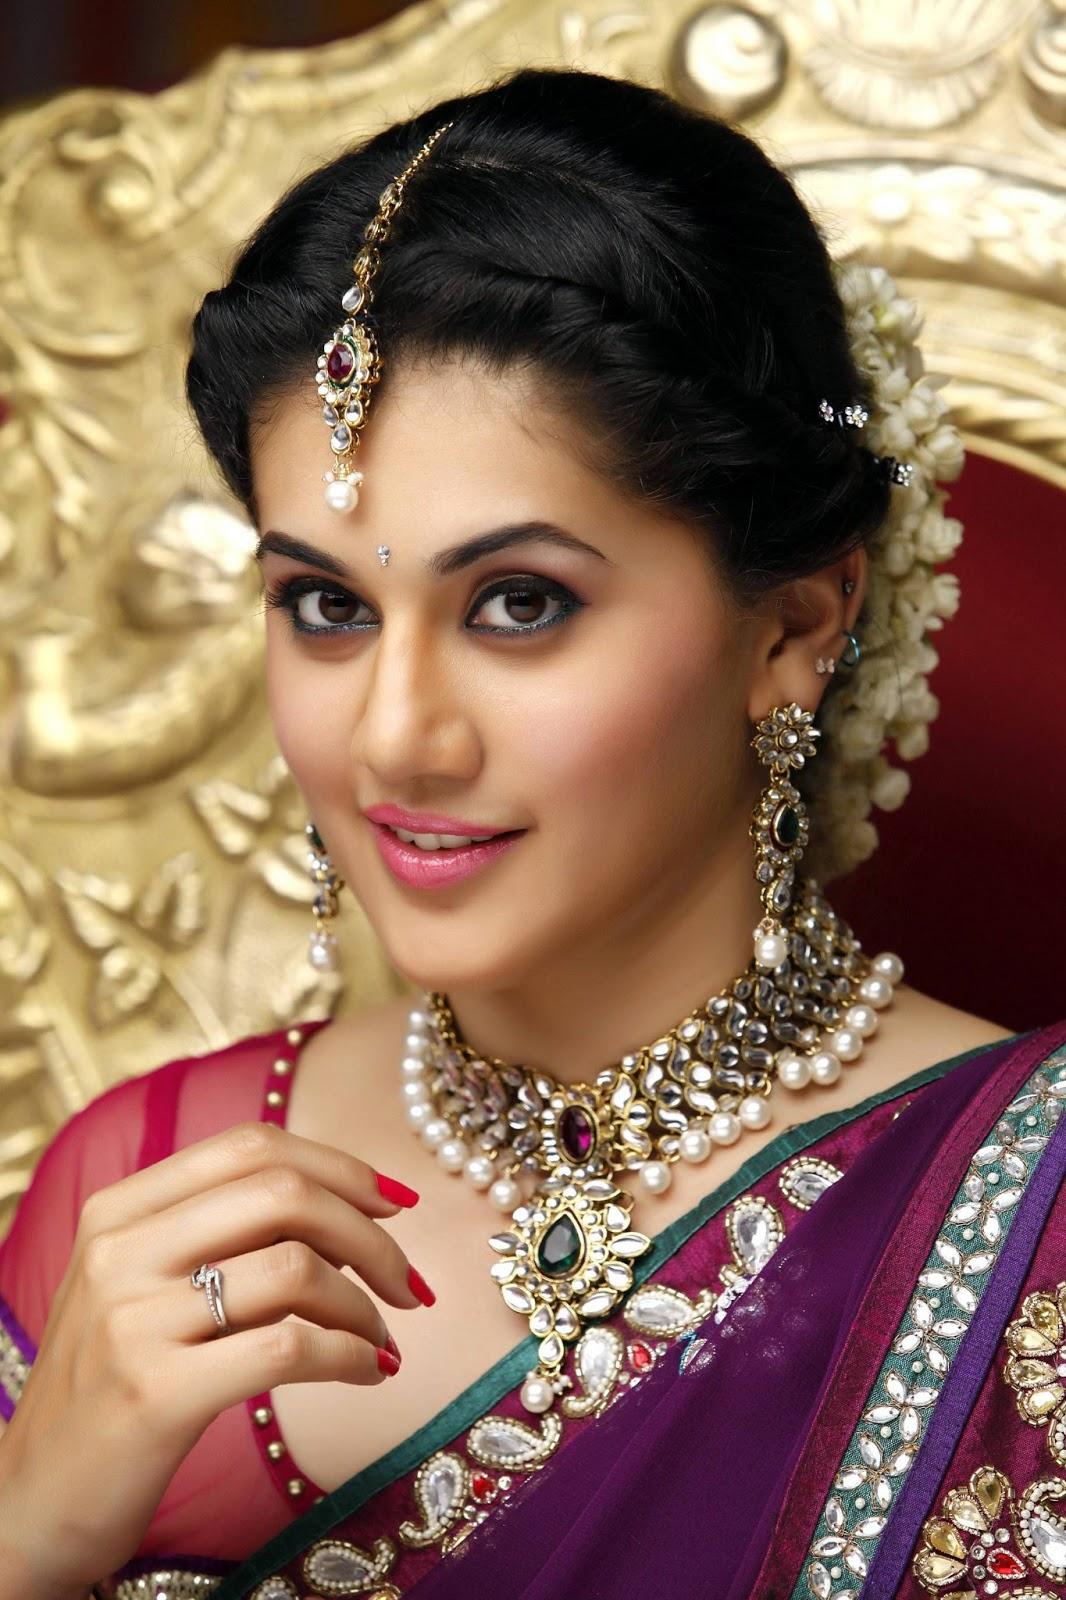 taapsee_pannu_wall_971566